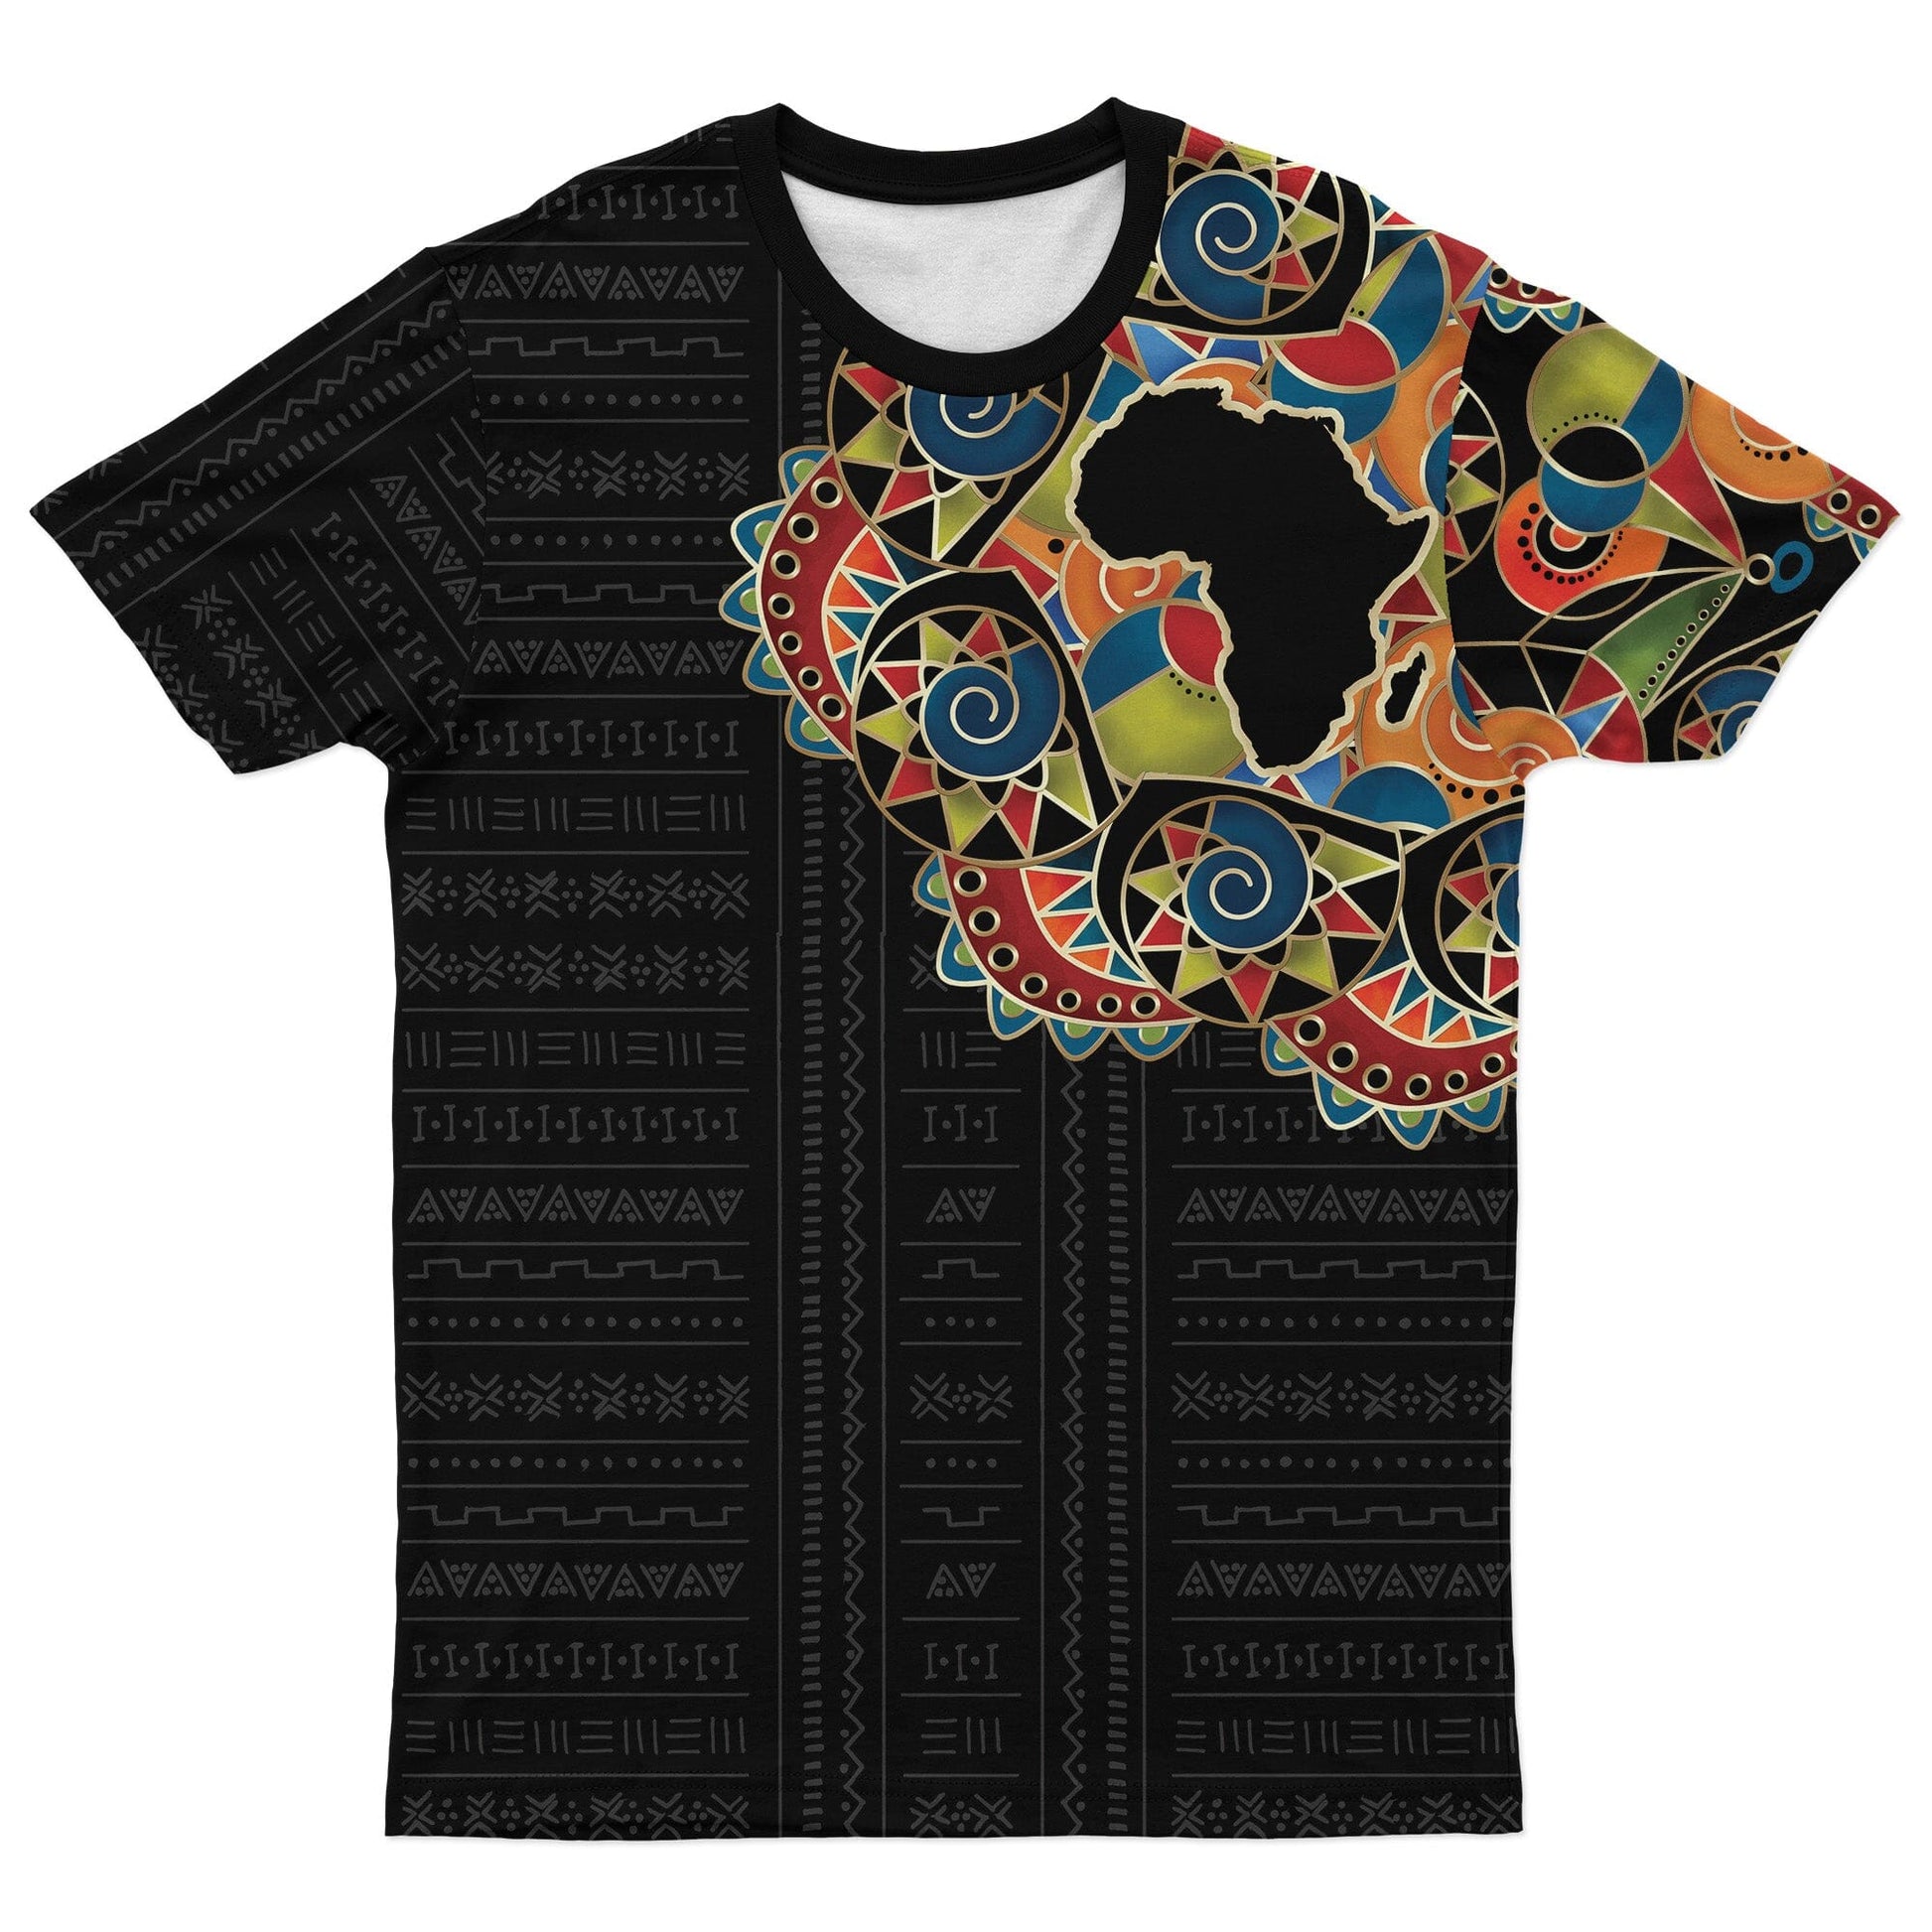 Multi-Colored Sleeve African Pattern Print T-Shirt AOP Tee Tianci 